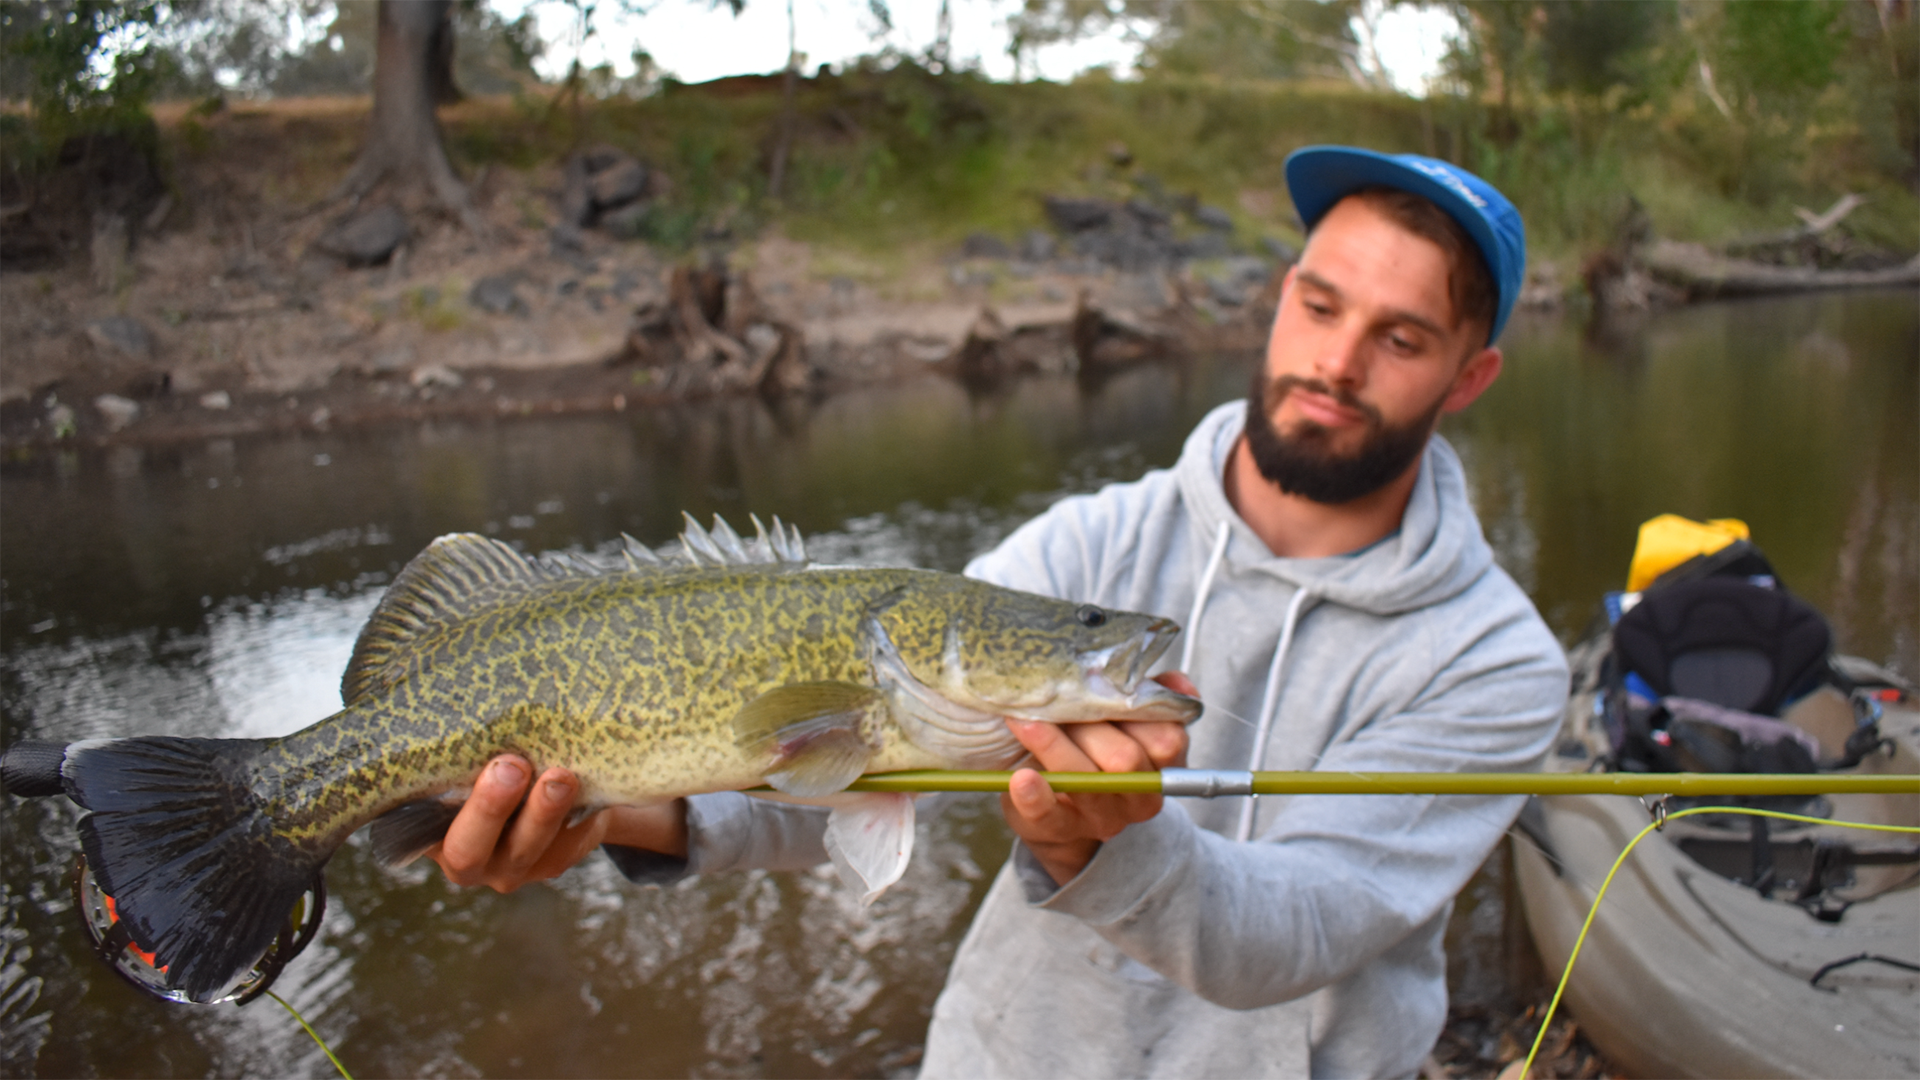 Local Angler standing next to river with Murray Cod in his hands